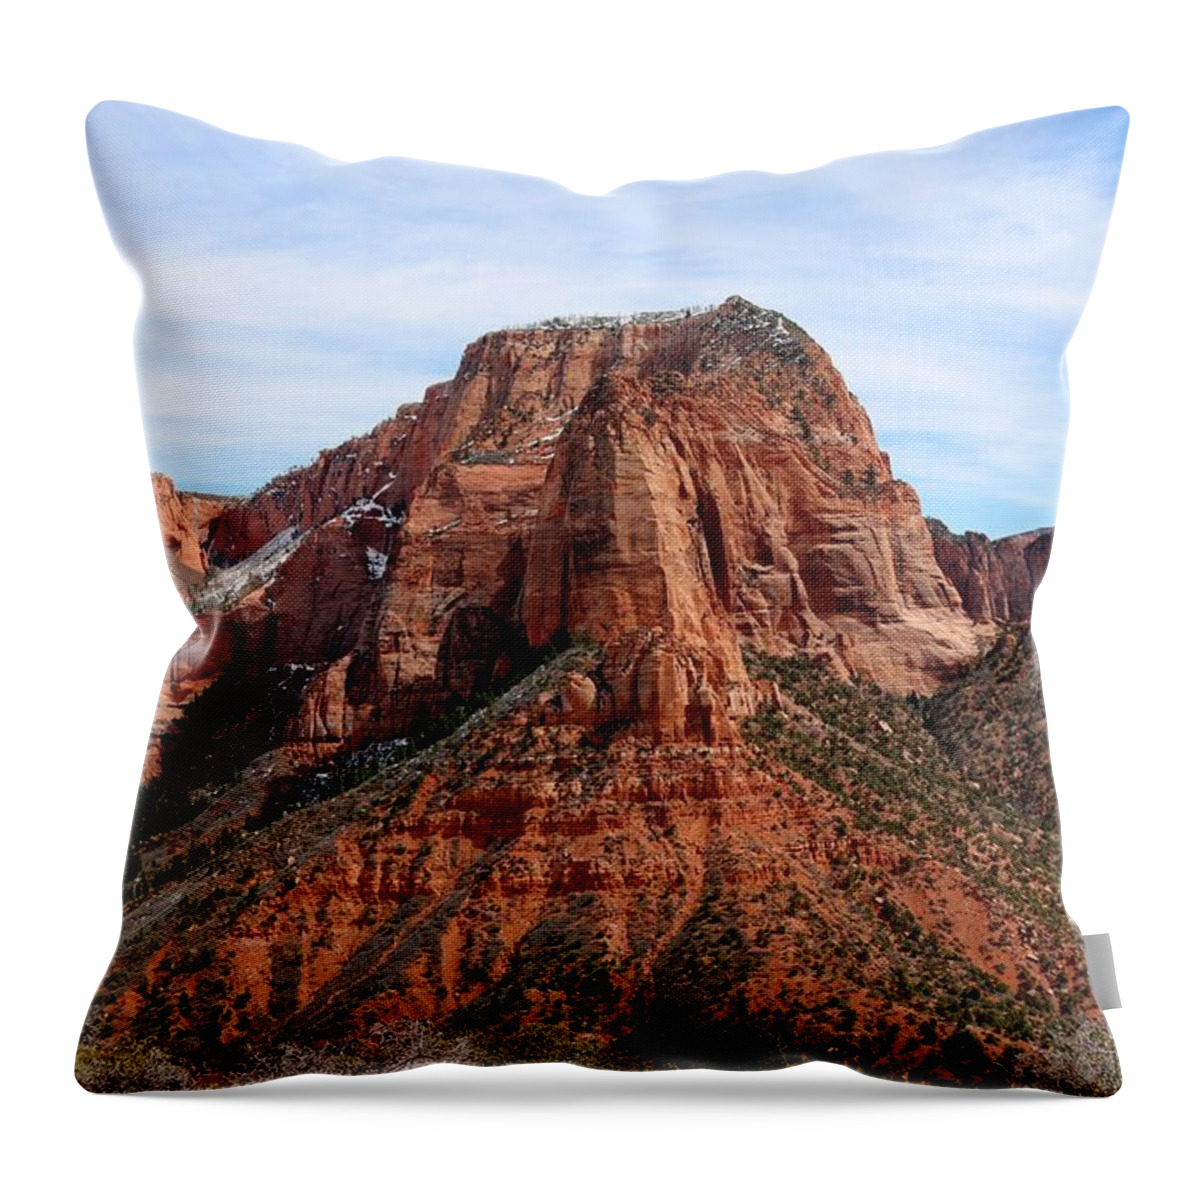 Kolob Canyon Throw Pillow featuring the photograph Kolob Canyon Dusted with Snow - 4 by Christy Pooschke